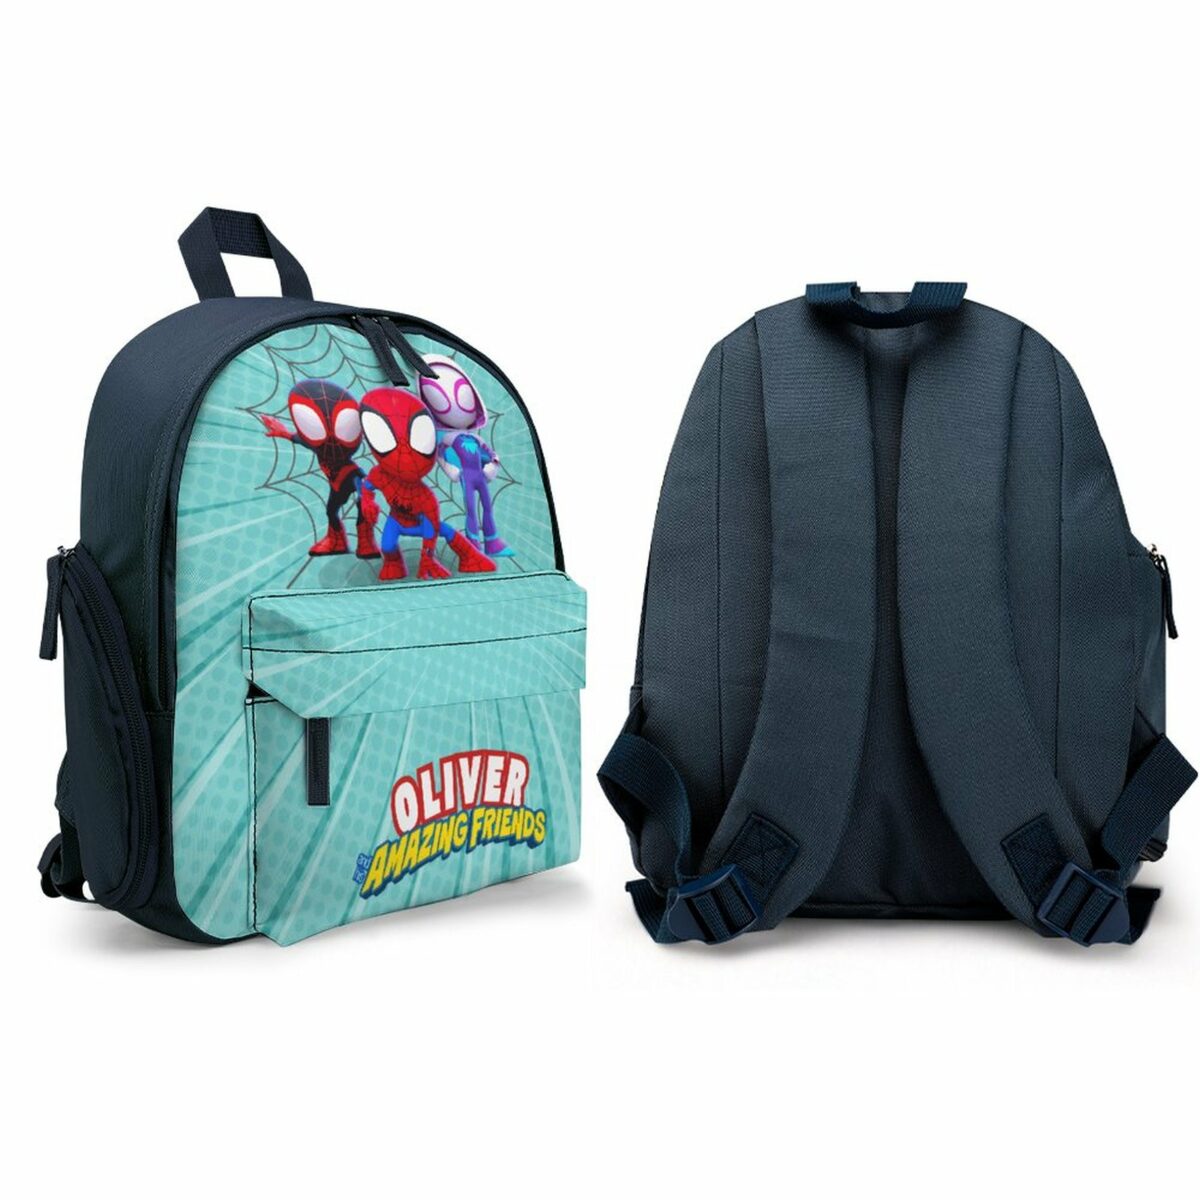 Spidey and his Amazing Friends Children’s Blue School Bag – Personalized Toddler’s Backpack Cool Kiddo 16